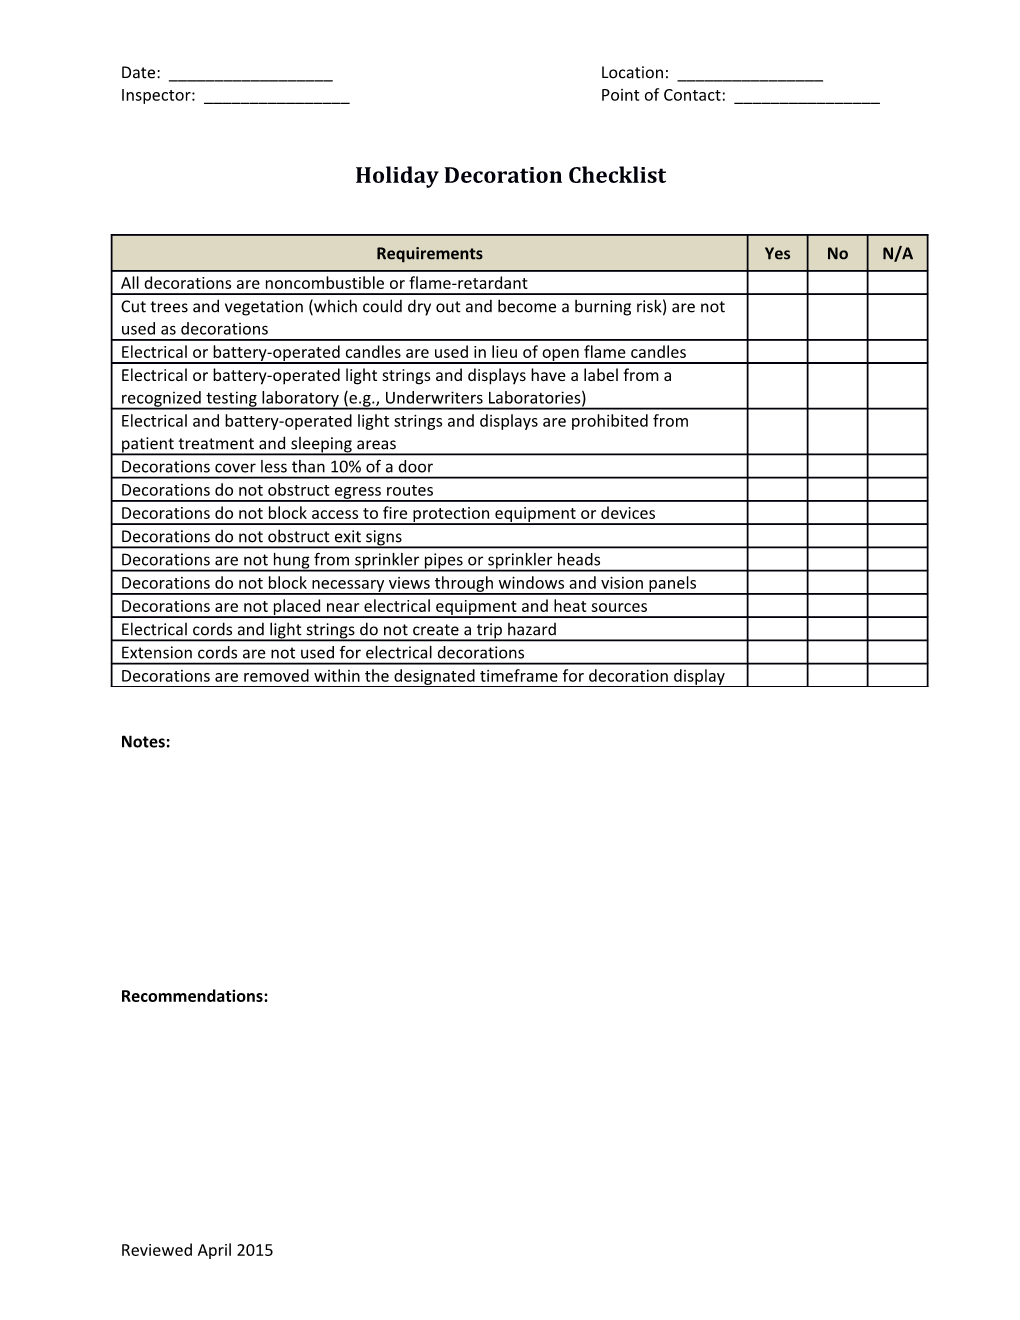 Medical Safety Template-Holiday Decoration Checklist